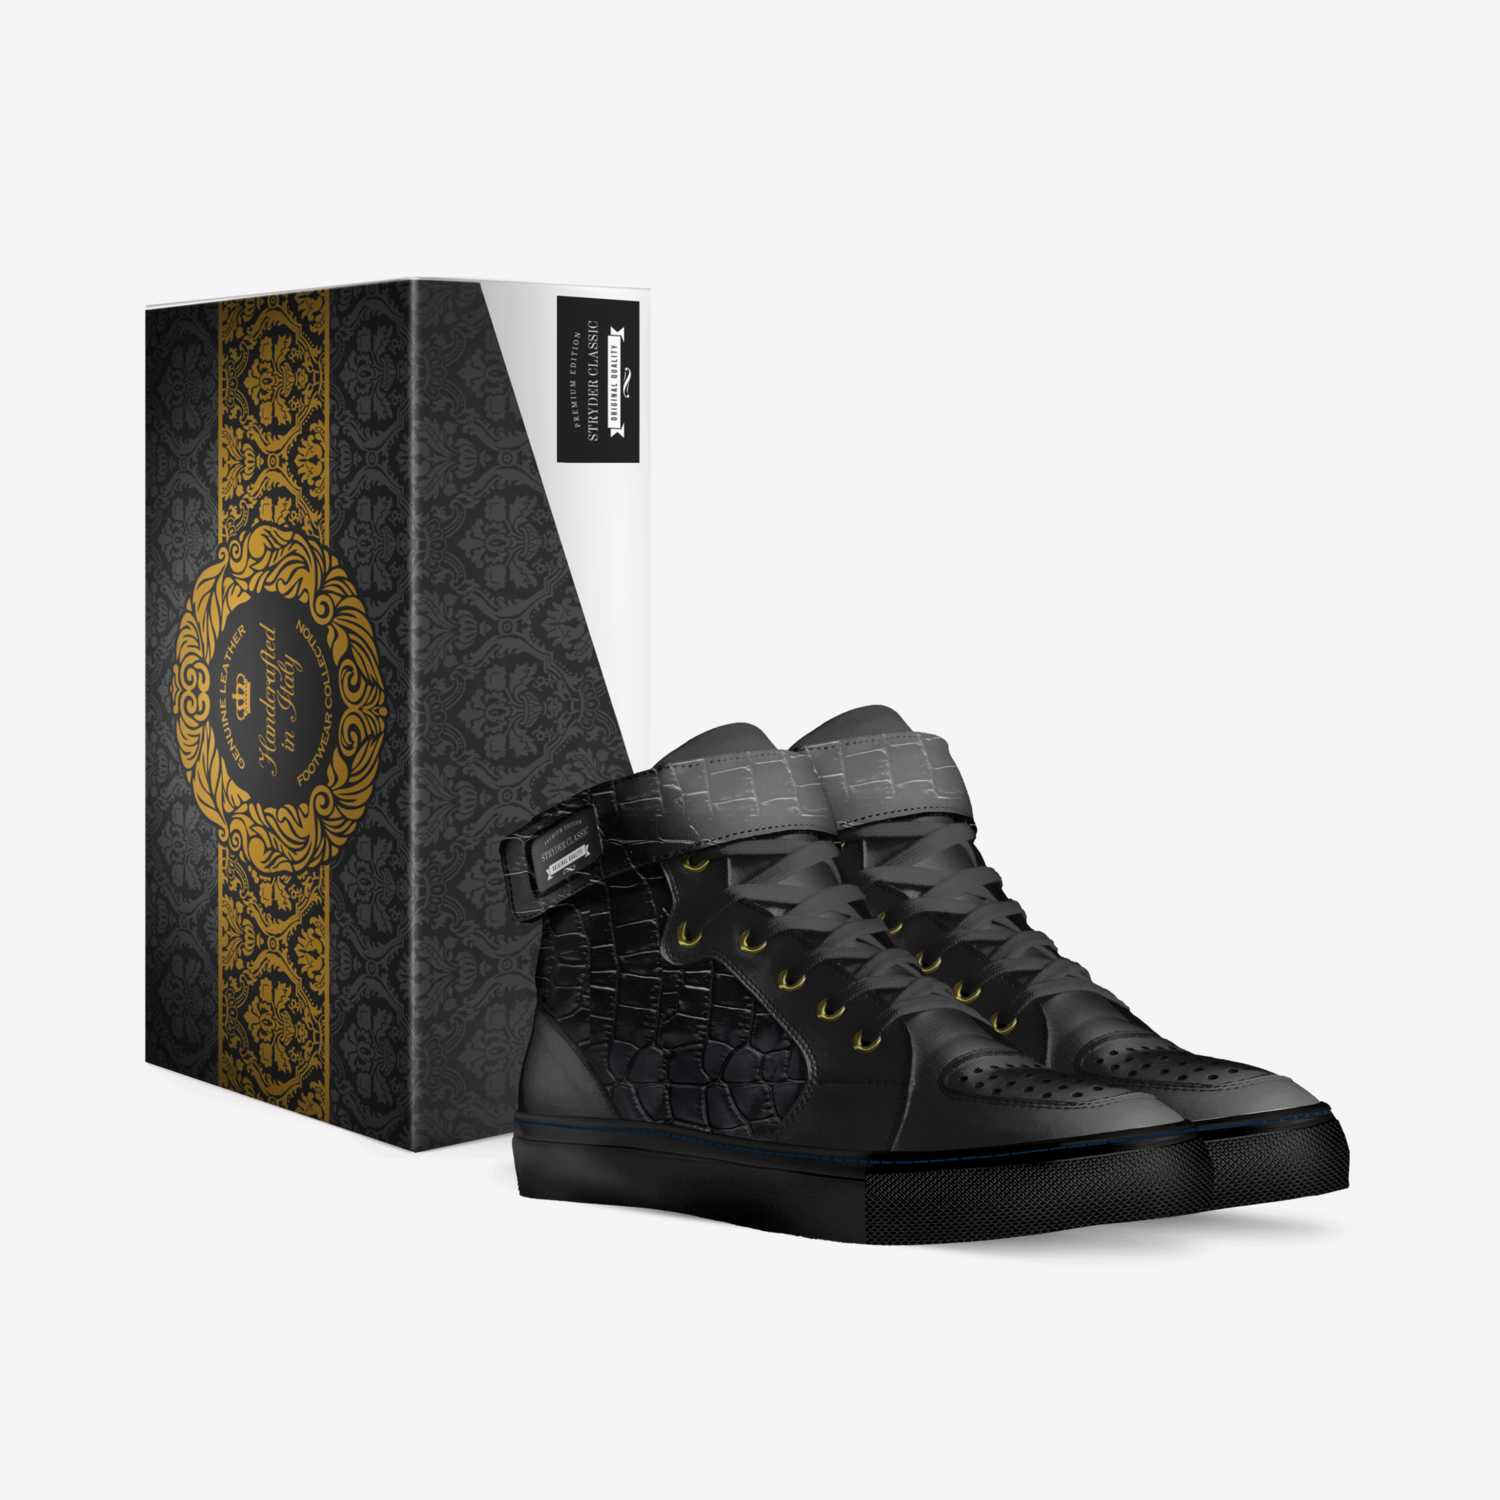 Stryder Classic custom made in Italy shoes by Amour Brand Collective | Box view